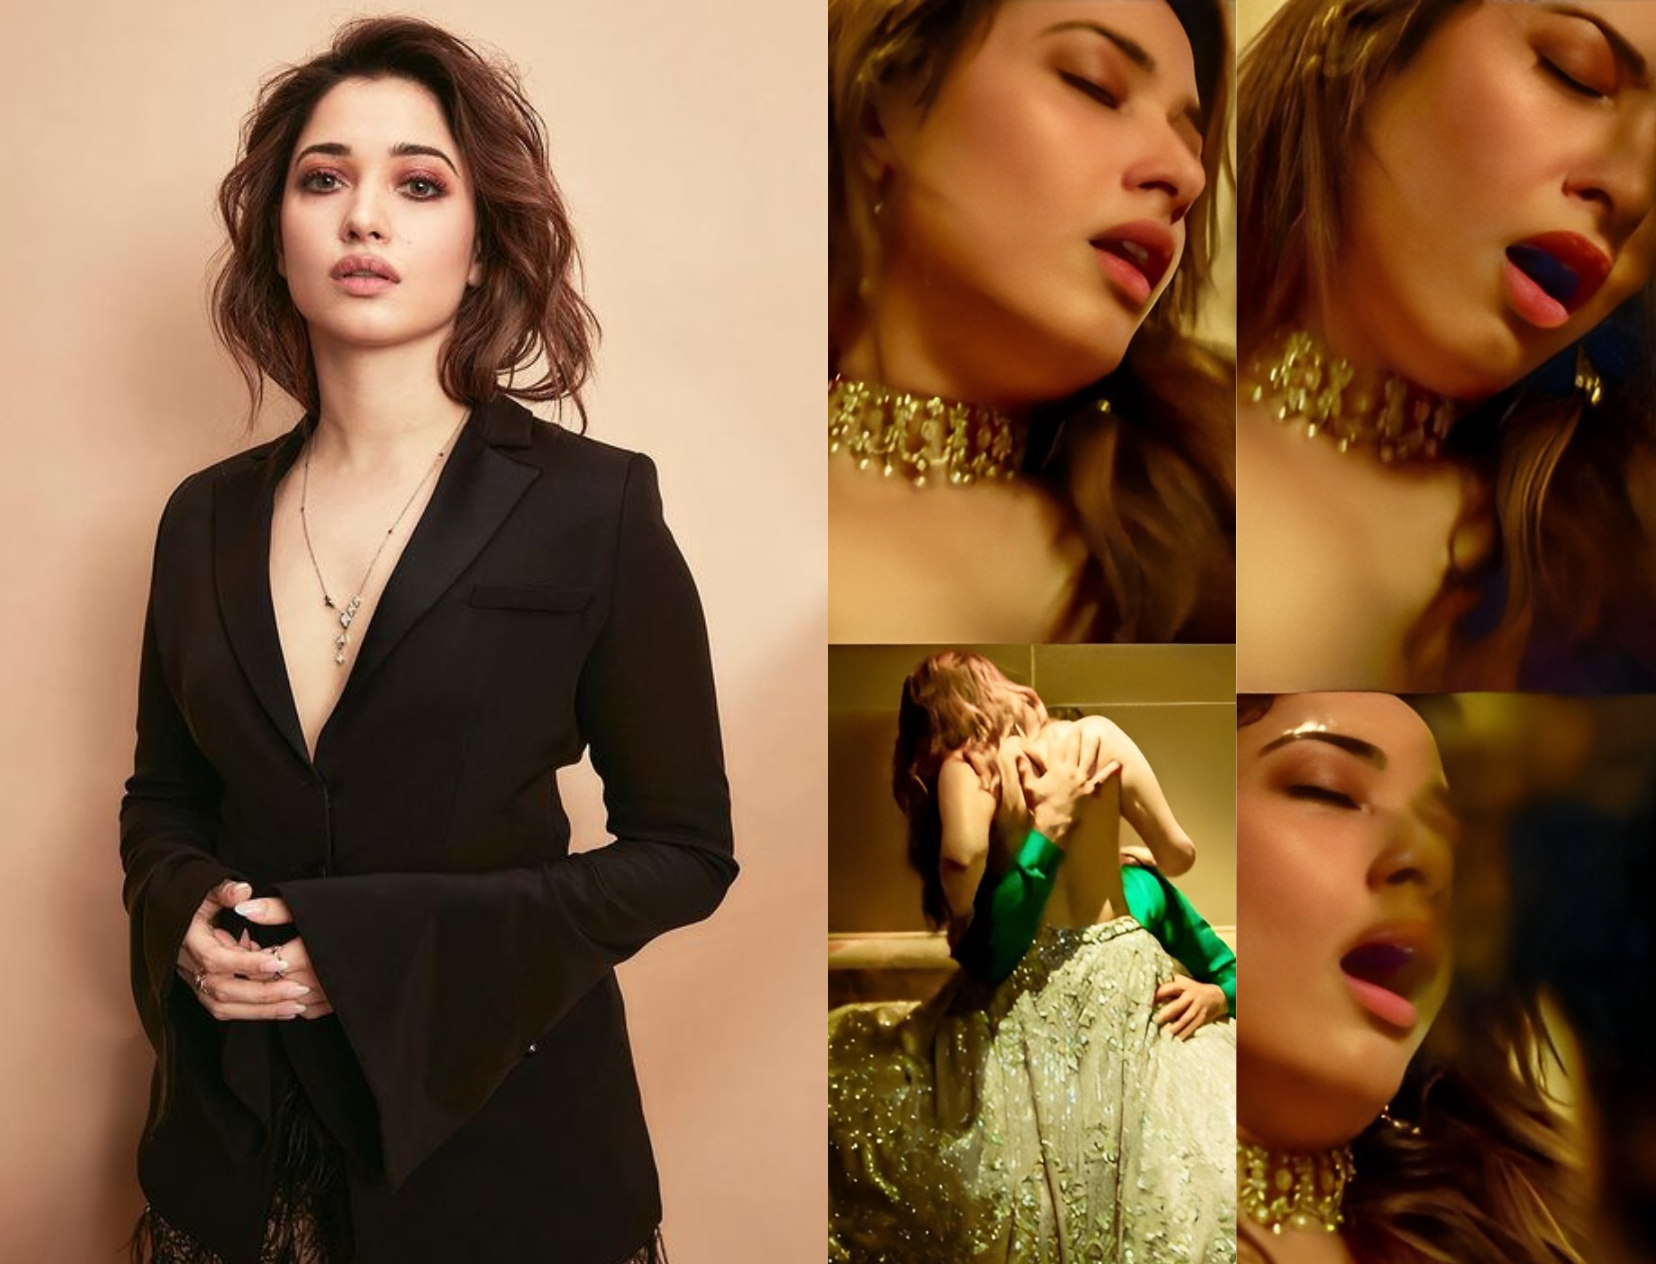 Tamanna Bhatia Ki Xxxy Bp Video - Tamannaah Bhatia Gets Slammed For Going Topless In Jee Karda & We Are  Confused - India's Largest Digital Community of Women | POPxo